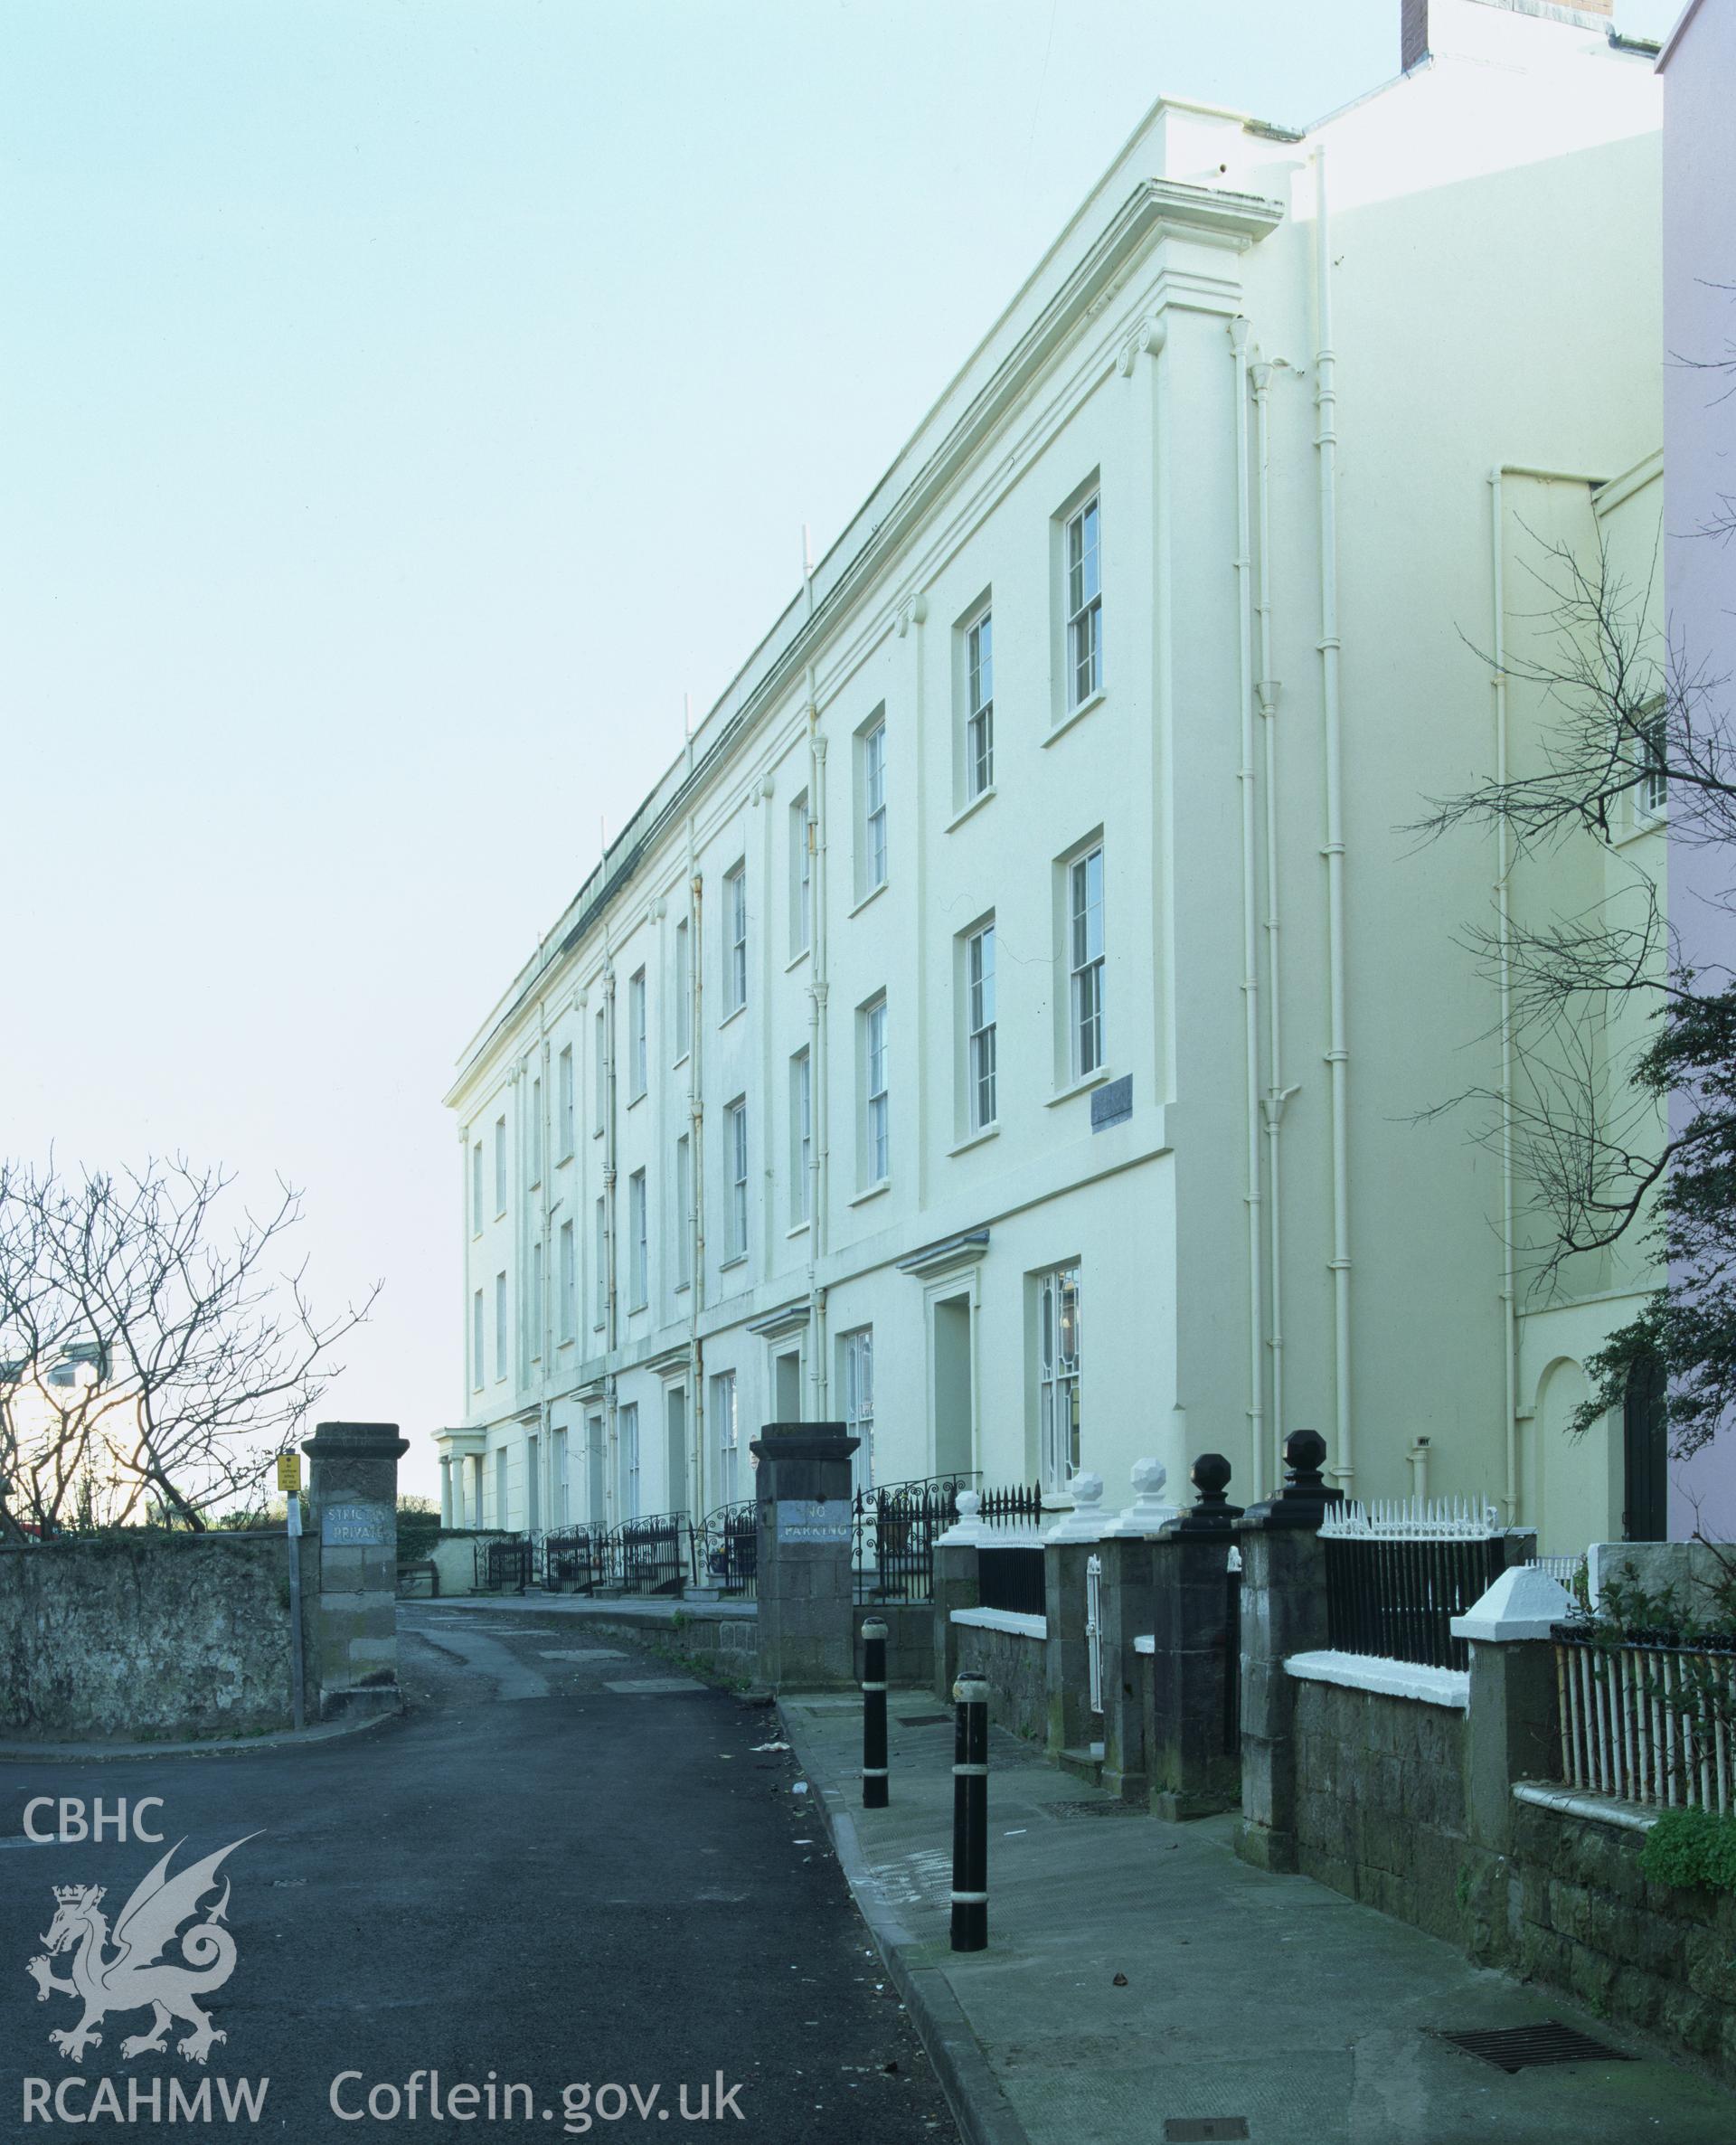 RCAHMW colour transparency showing general view of Lexden Terrace, Tenby, taken by I.N. Wright, 2003.